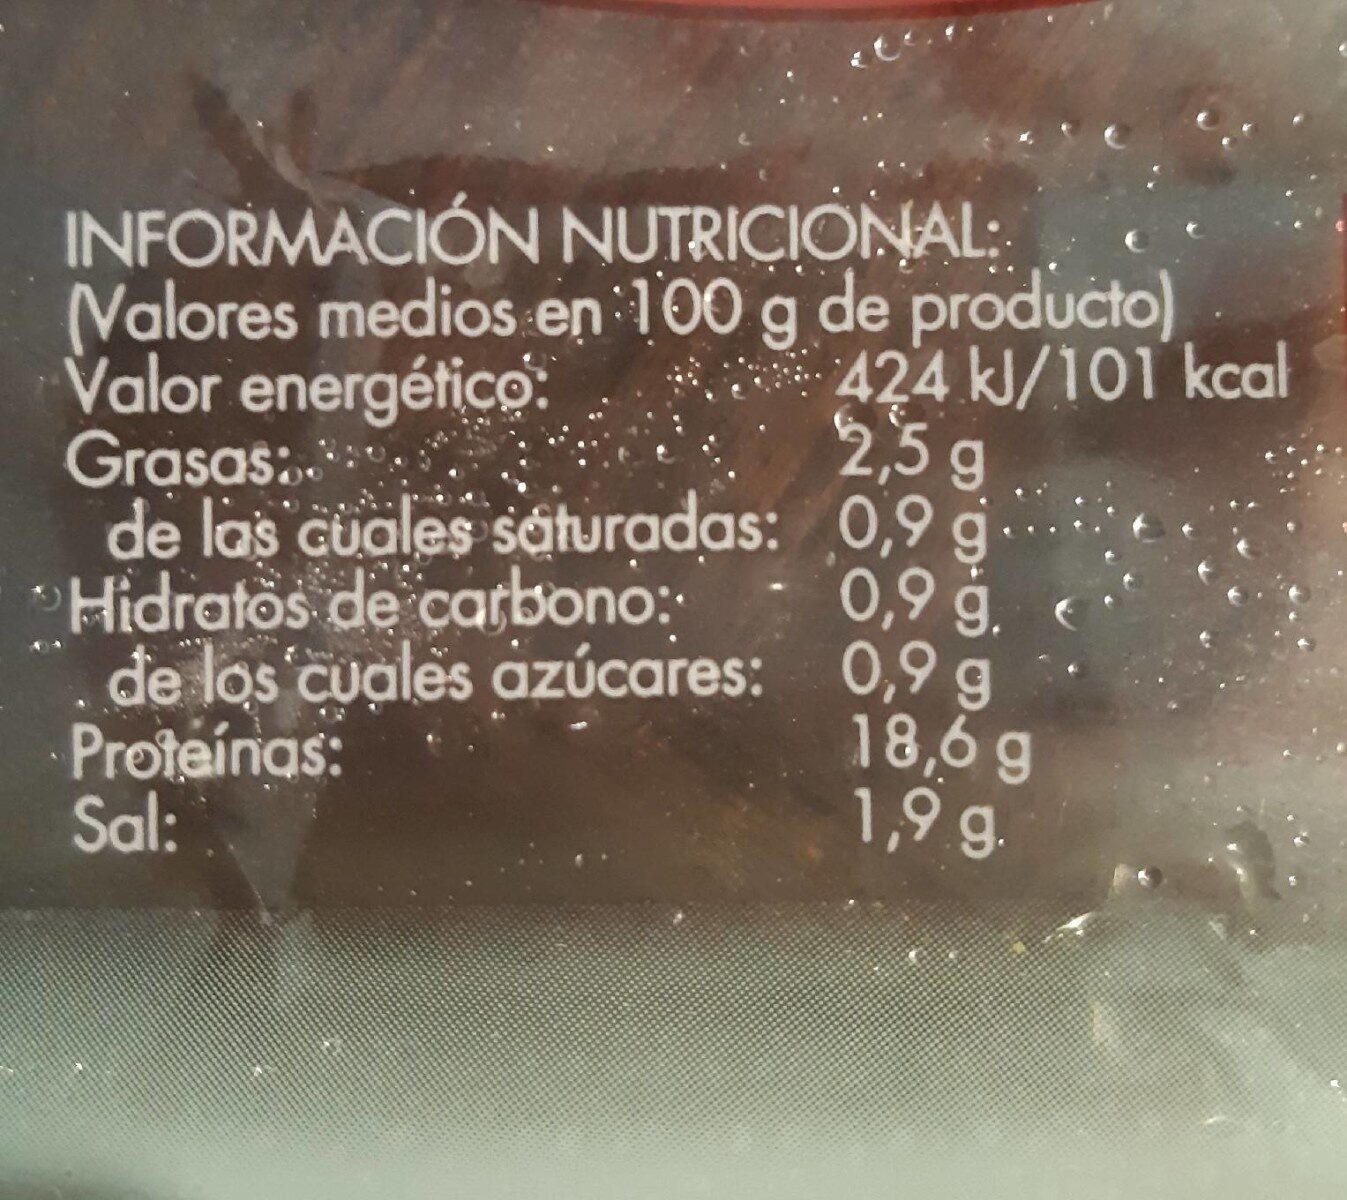 Jamón cocido extra finas lonchas - Tableau nutritionnel